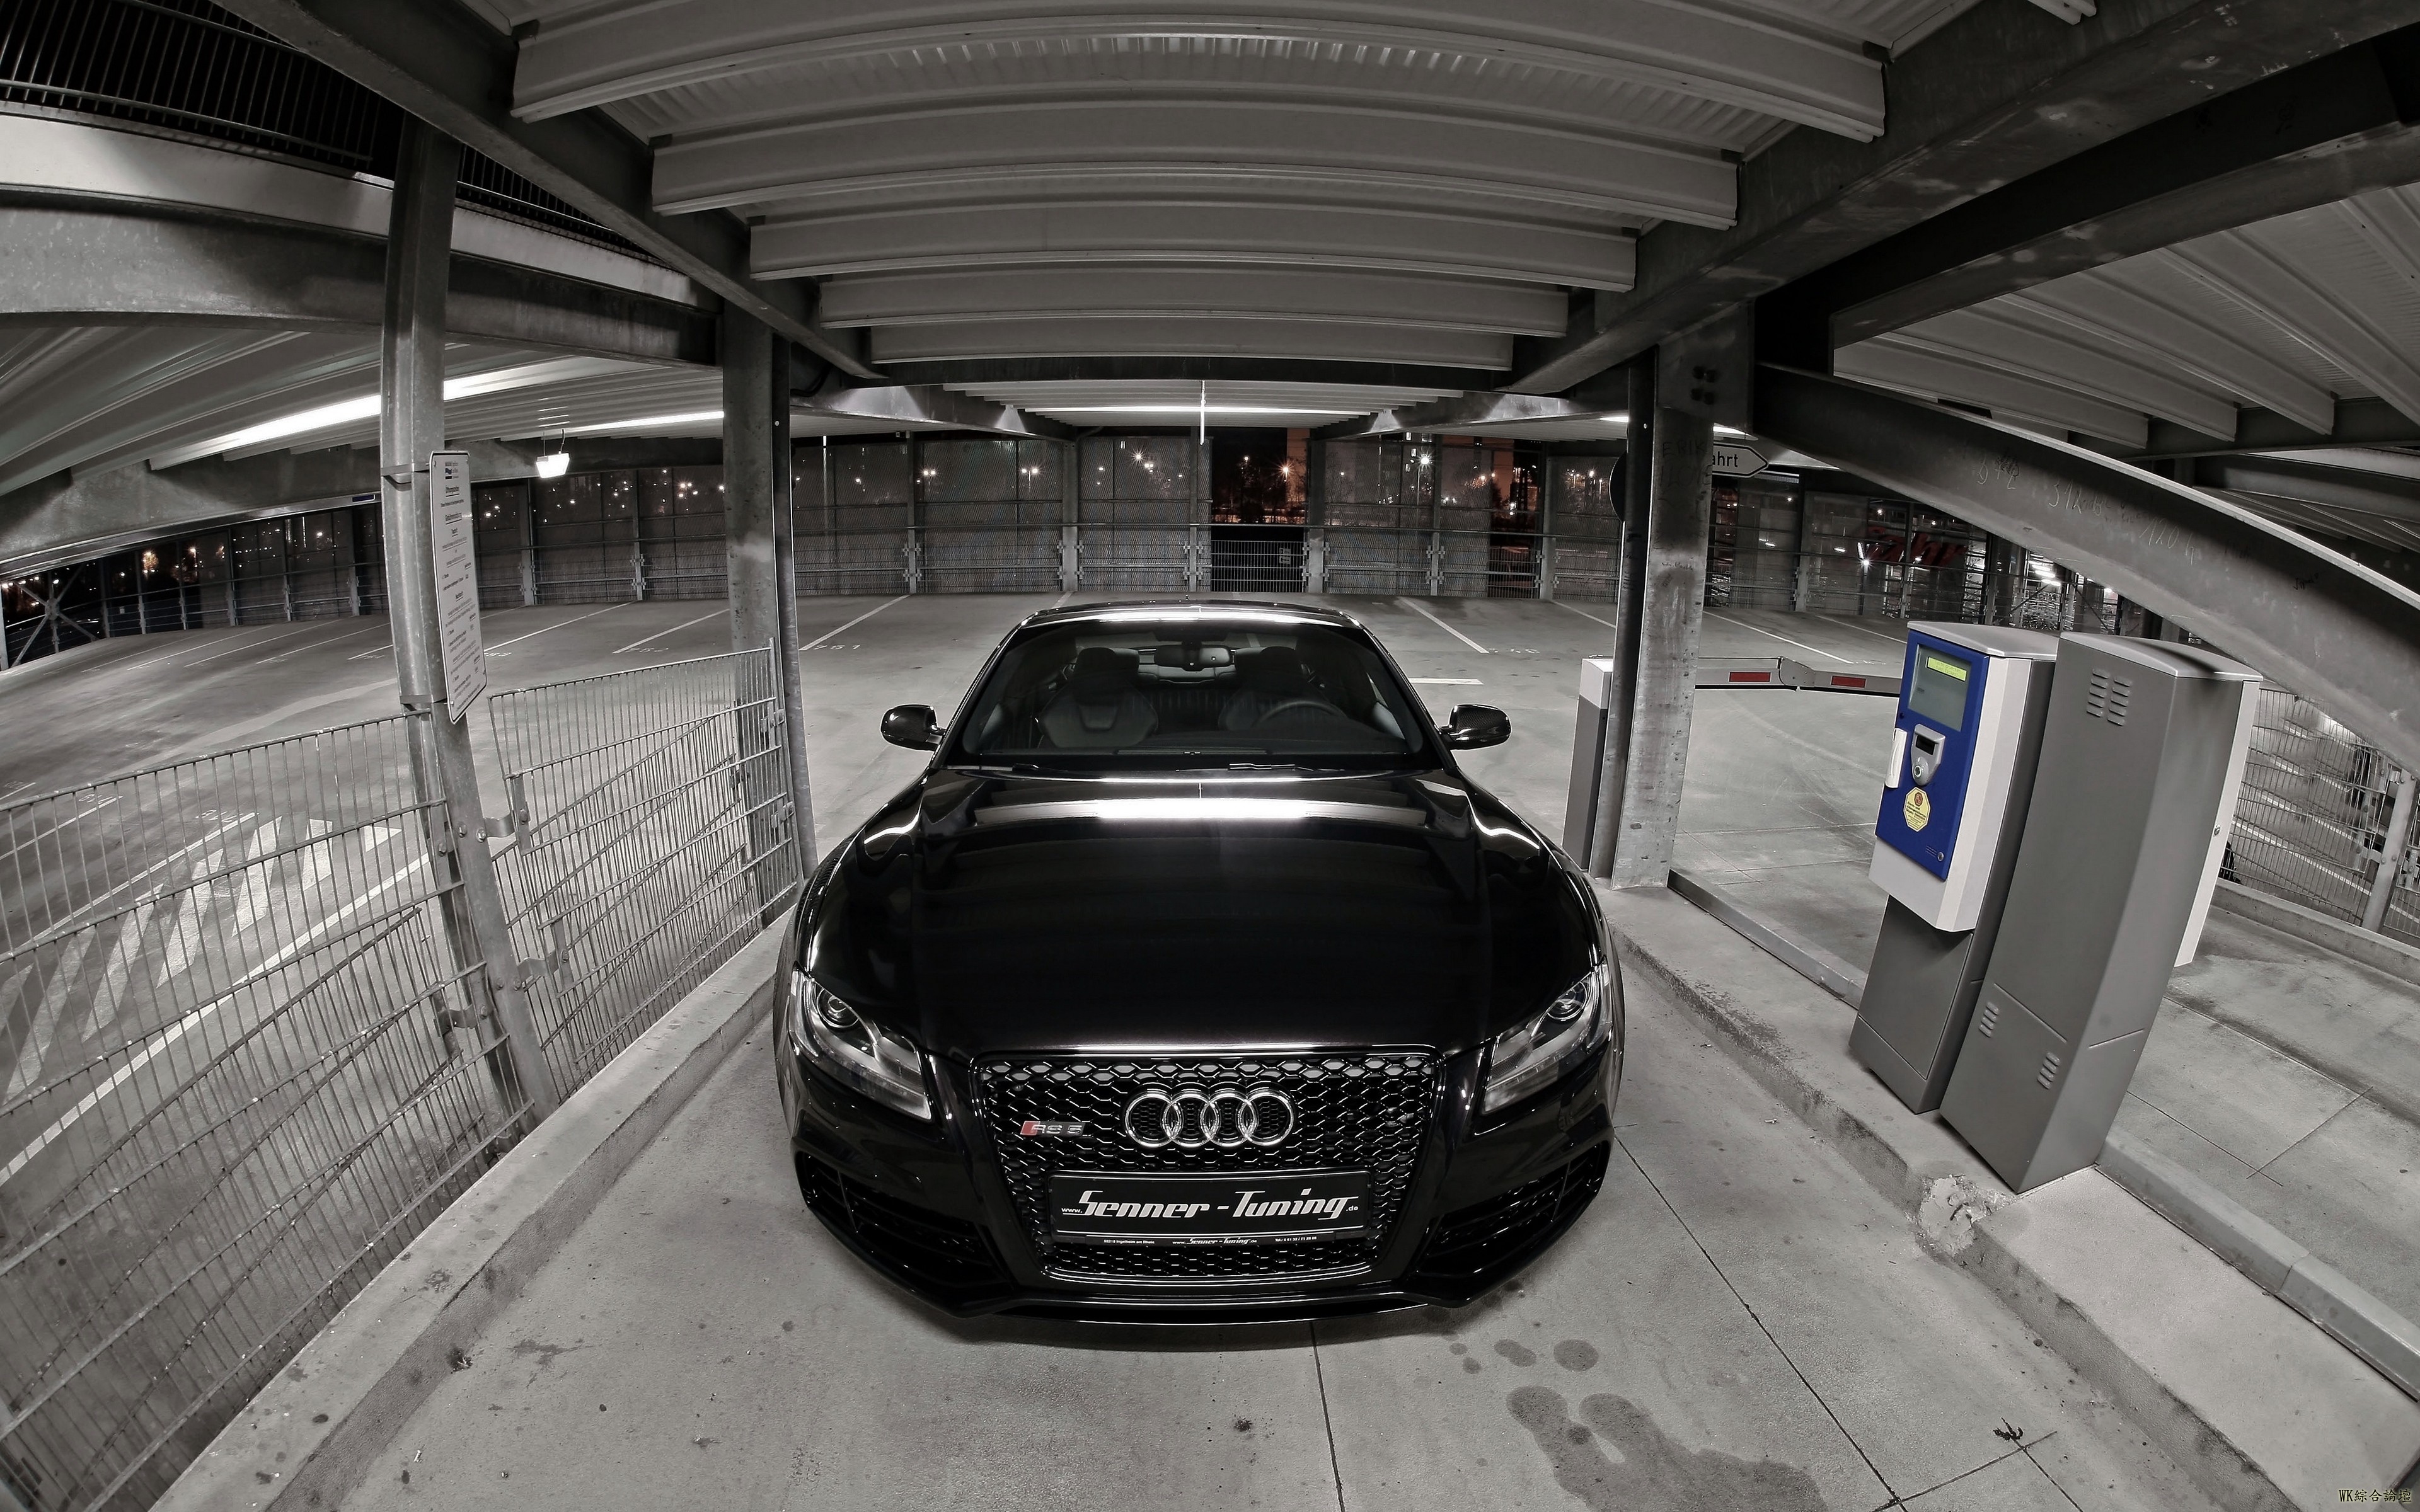 audi_rs5_tuning_front_view_113328_3840x2400.jpg